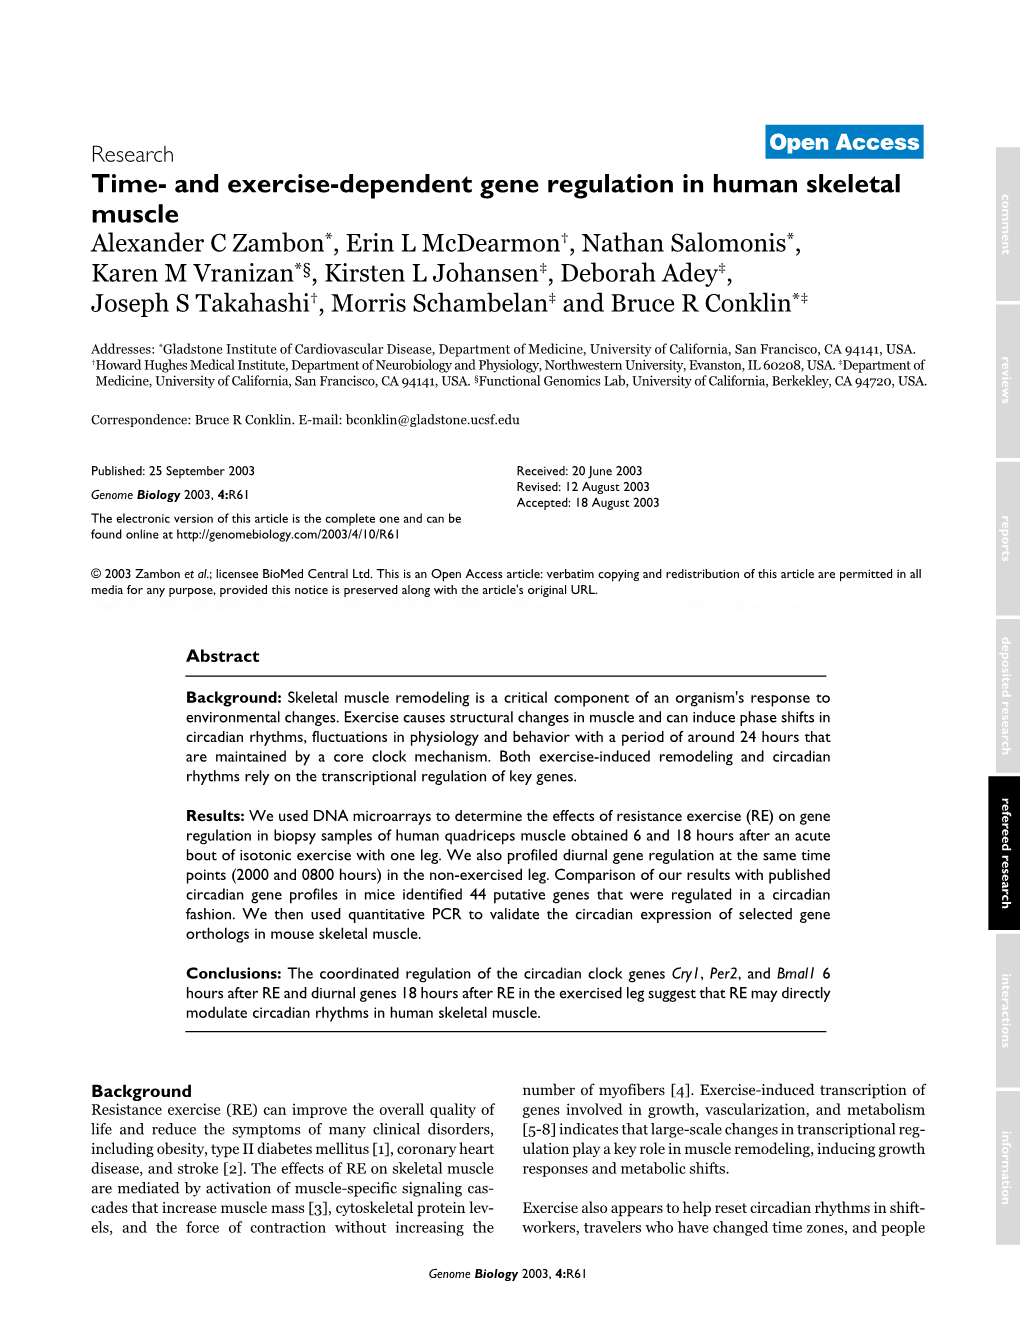 Time- and Exercise-Dependent Gene Regulation in Human Skeletal Muscle